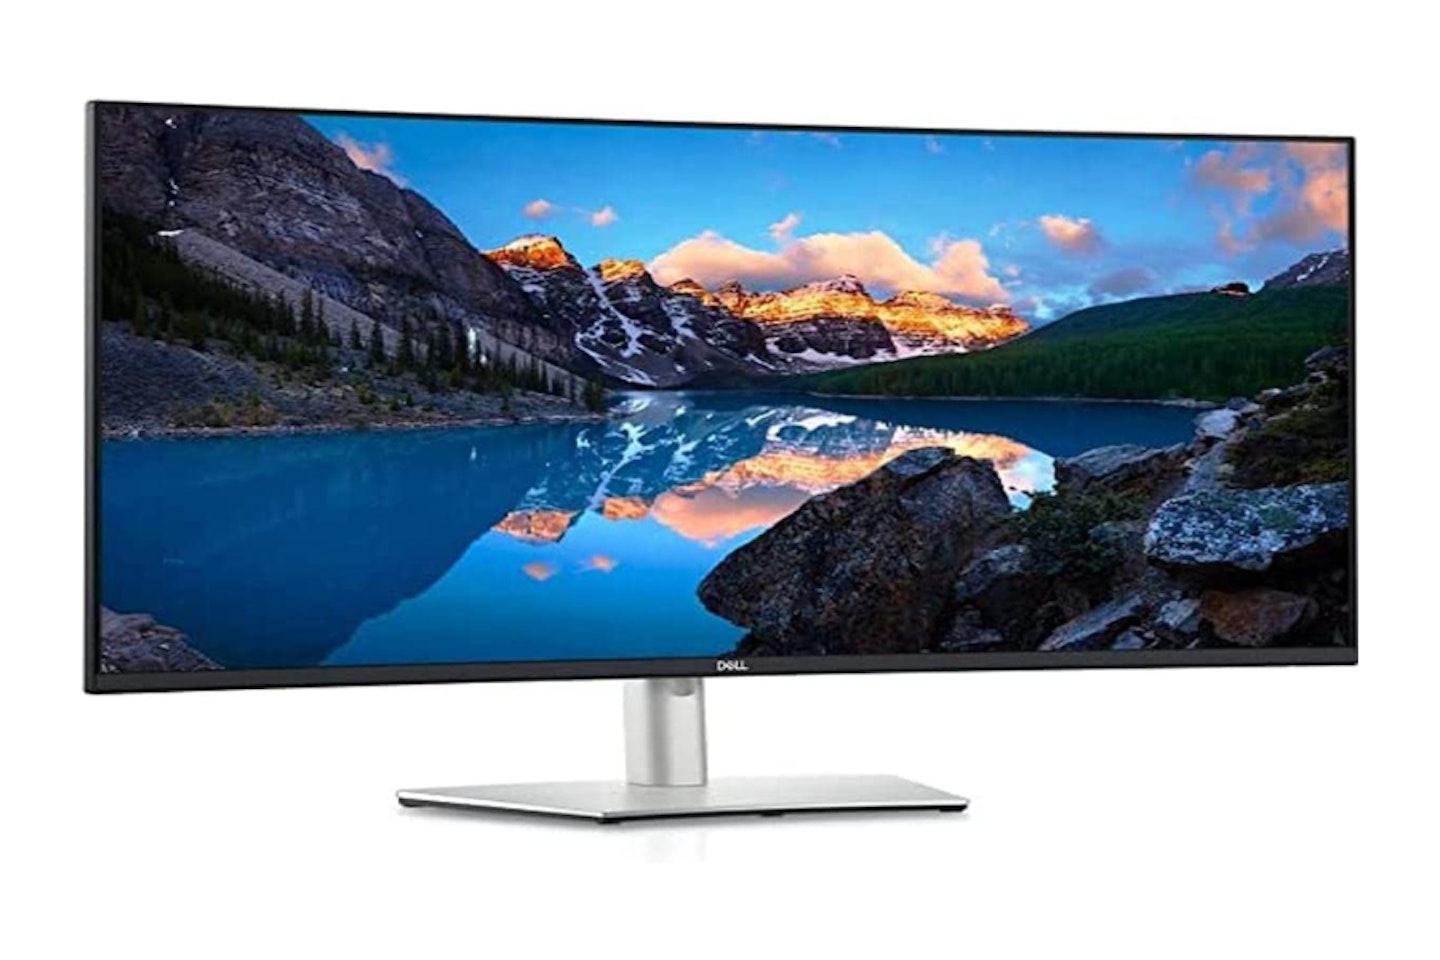 Dell UltraSharp 40" Curved WUHD Monitor  - possibly the best ultrawide curved monitor